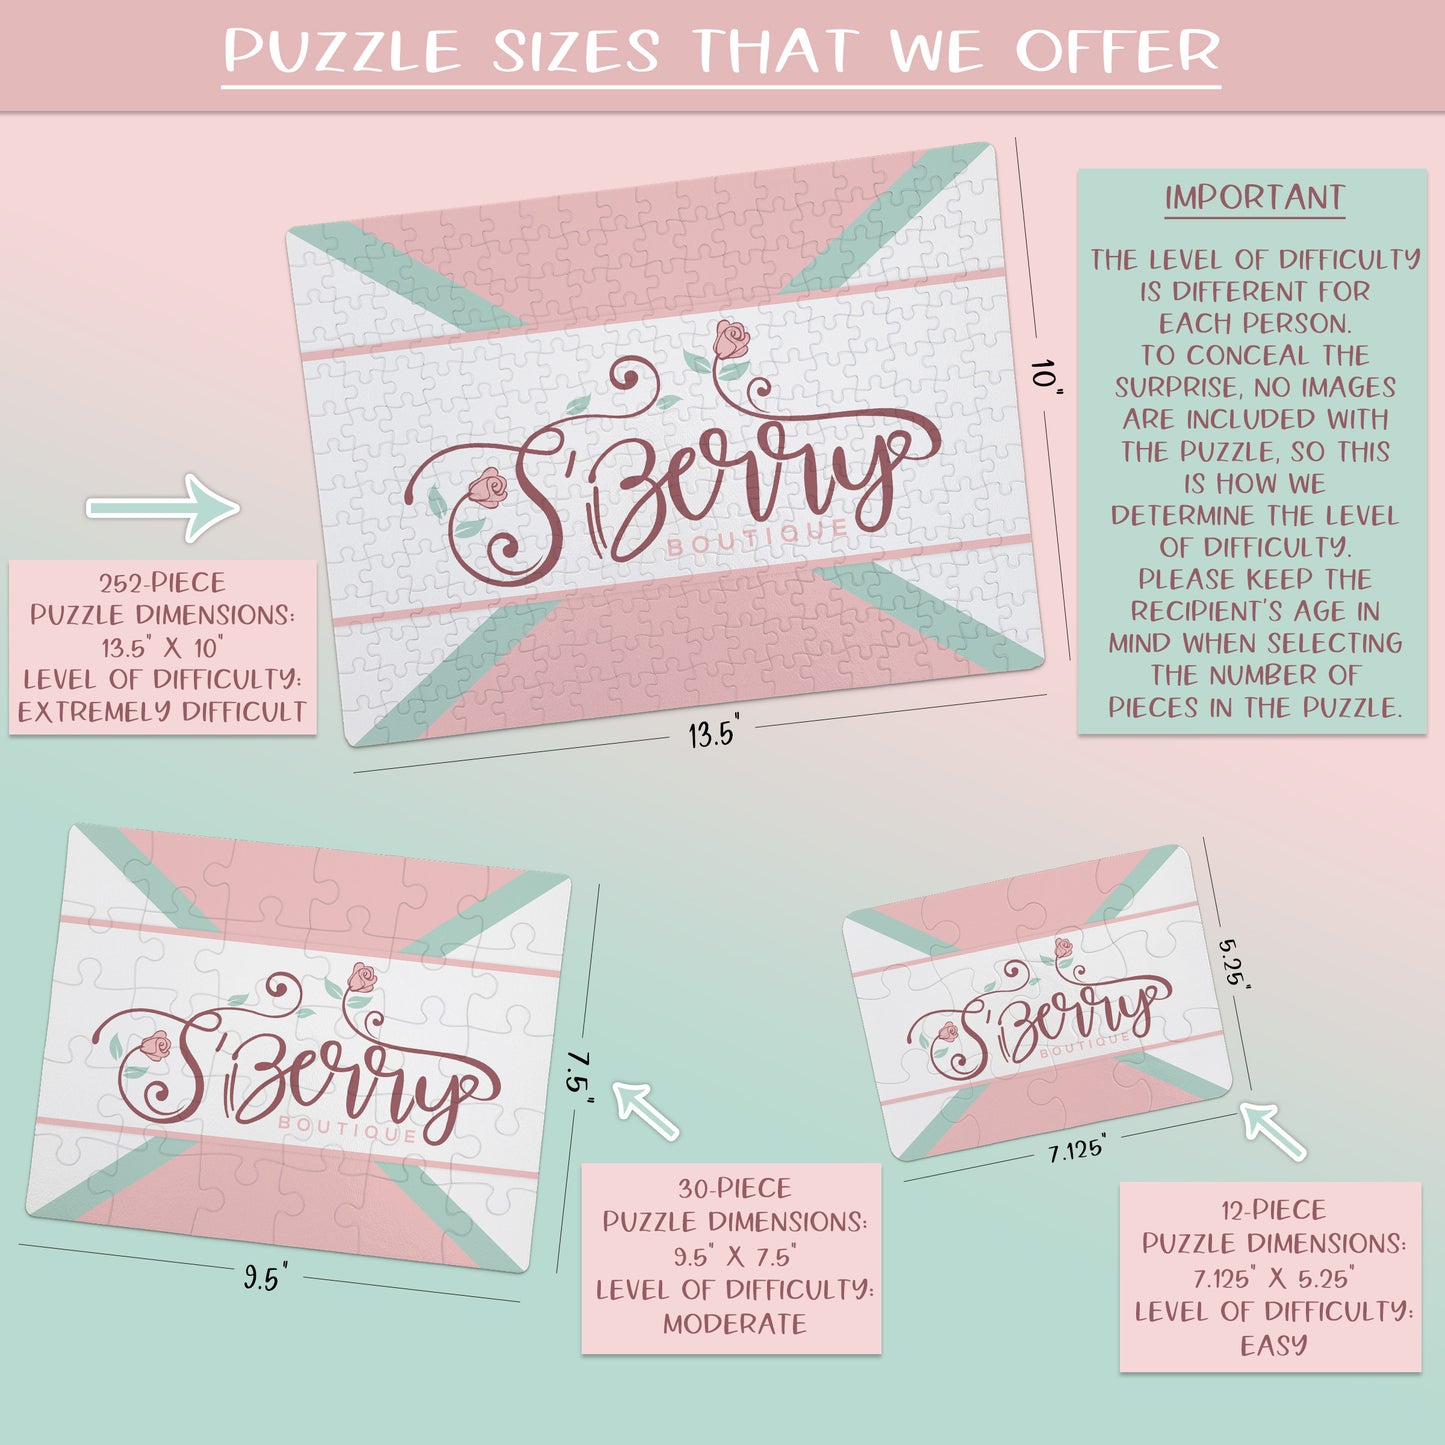 Create Your Own Puzzle - Arrow Design - CYOP0218 | S'Berry Boutique